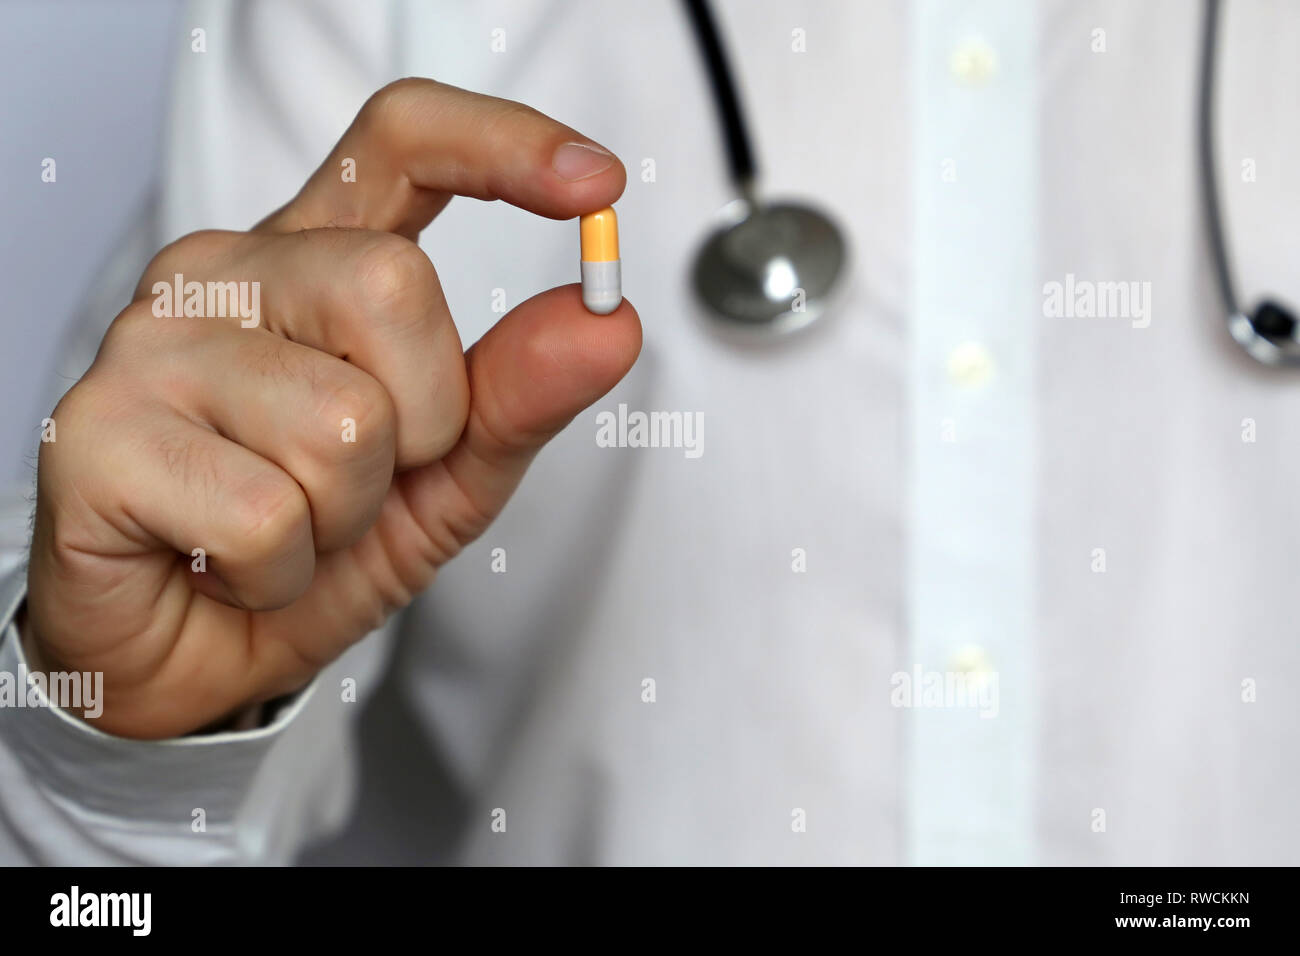 Doctor with pill, man giving medication in capsule. Concept of medical exam, dose of drugs, vitamins, medical prescription, pharmacy Stock Photo